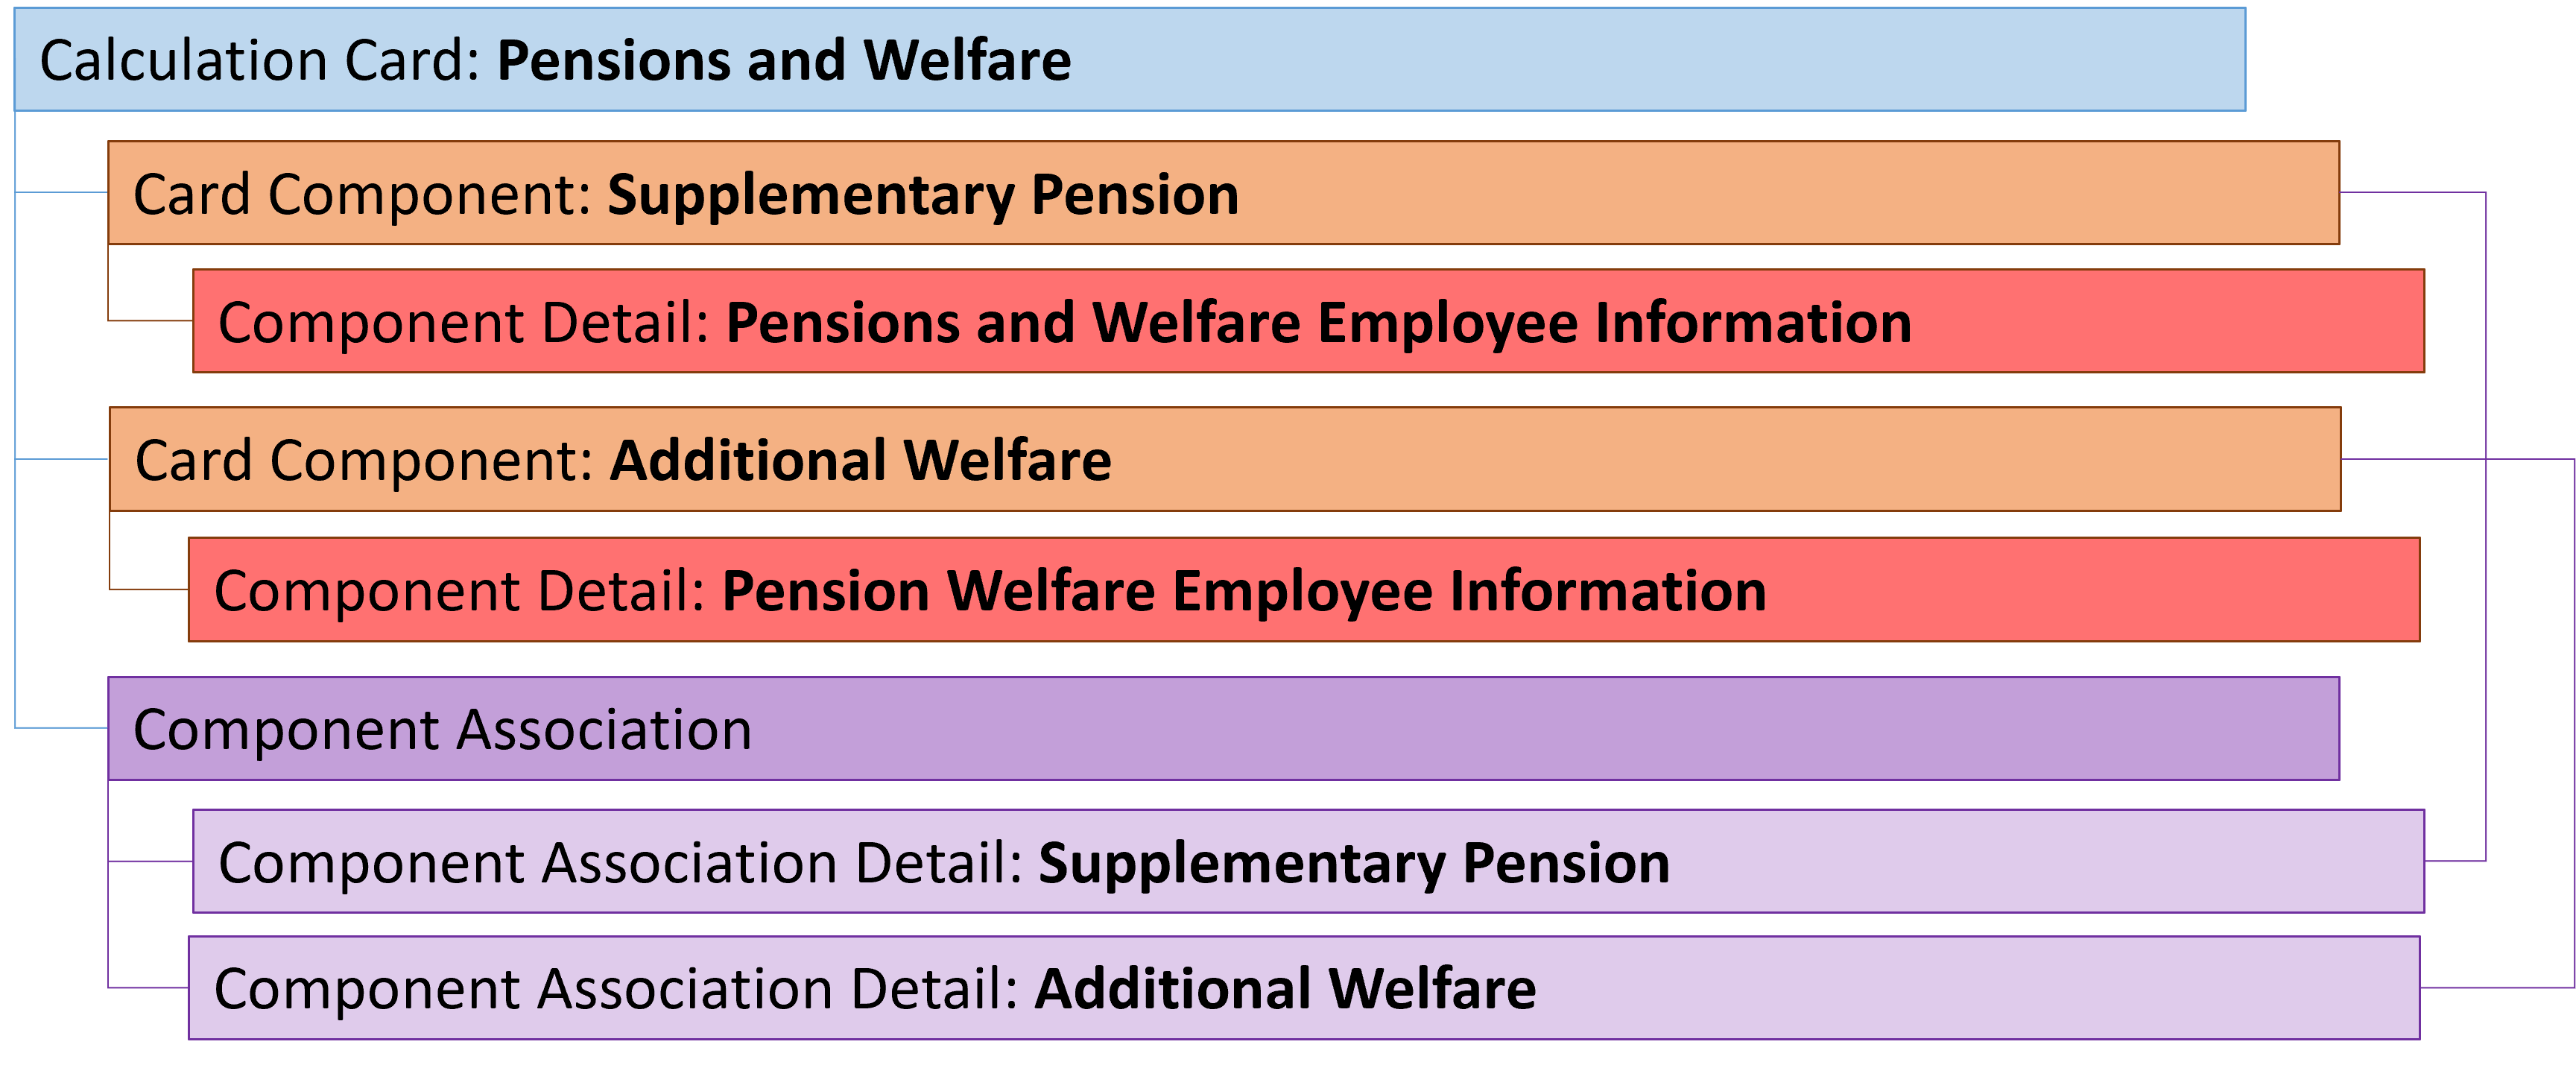 pension and welfare card hierarchy